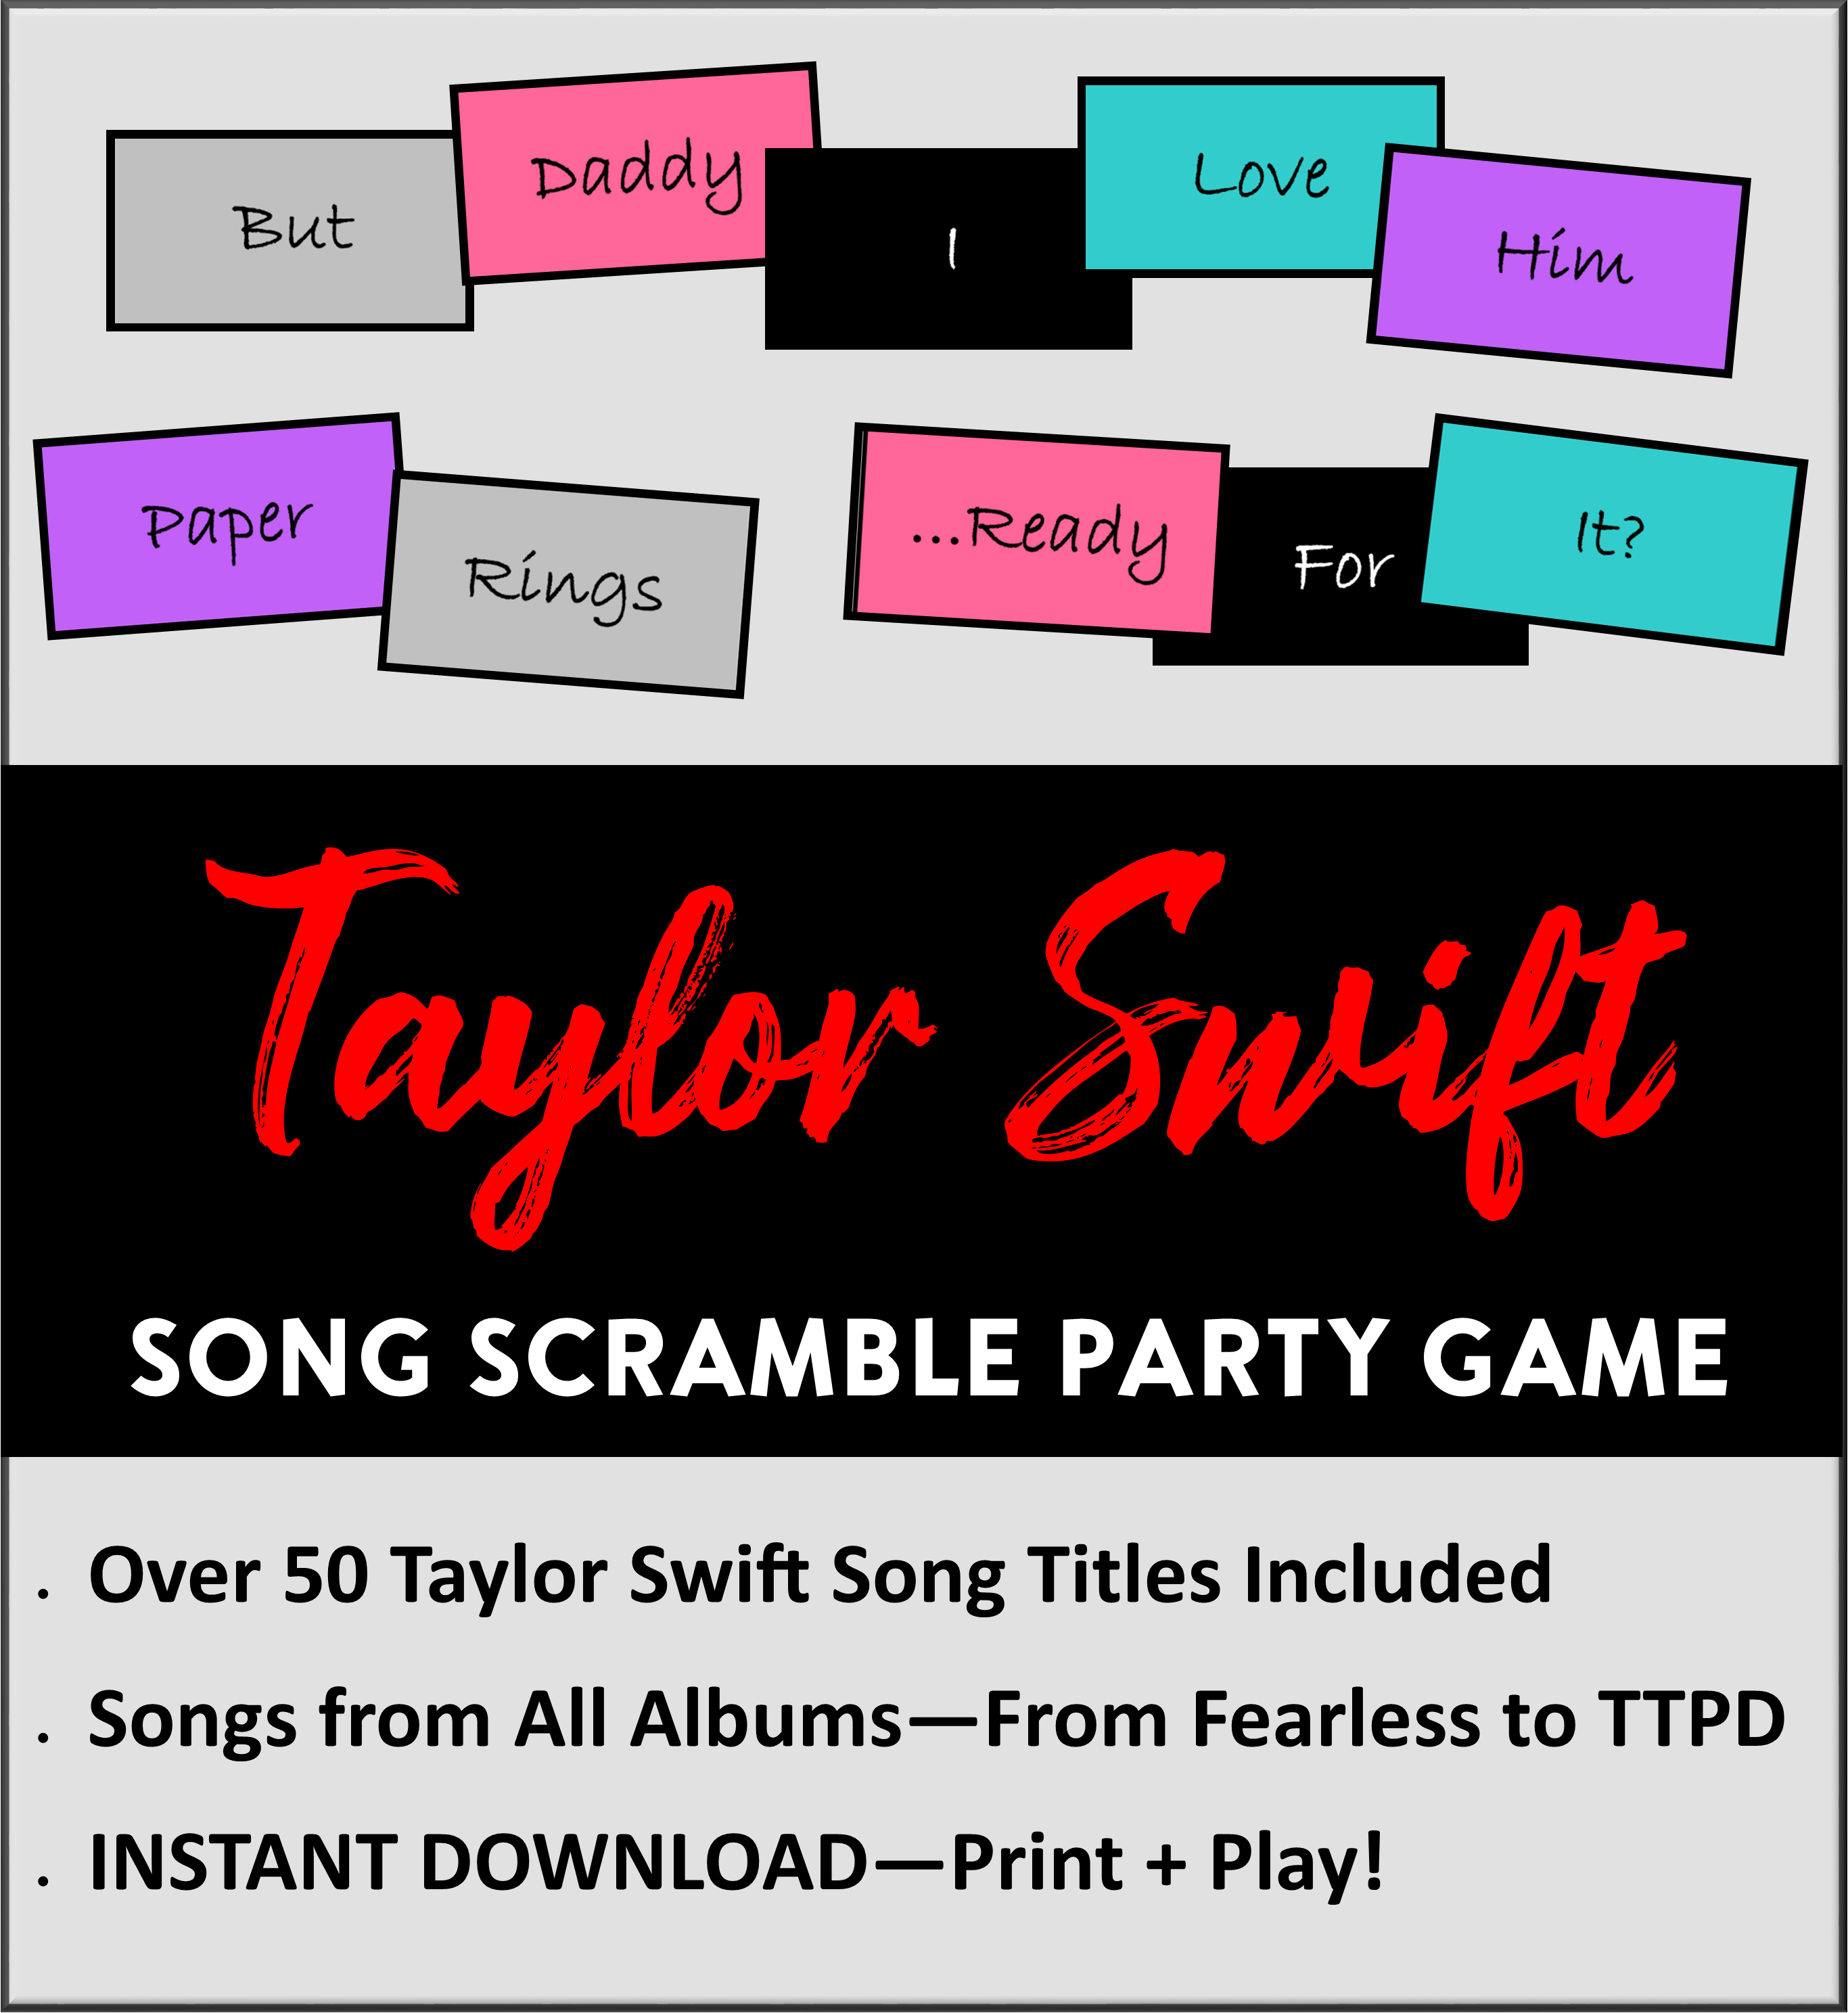 Taylor Swift Theme Party Games